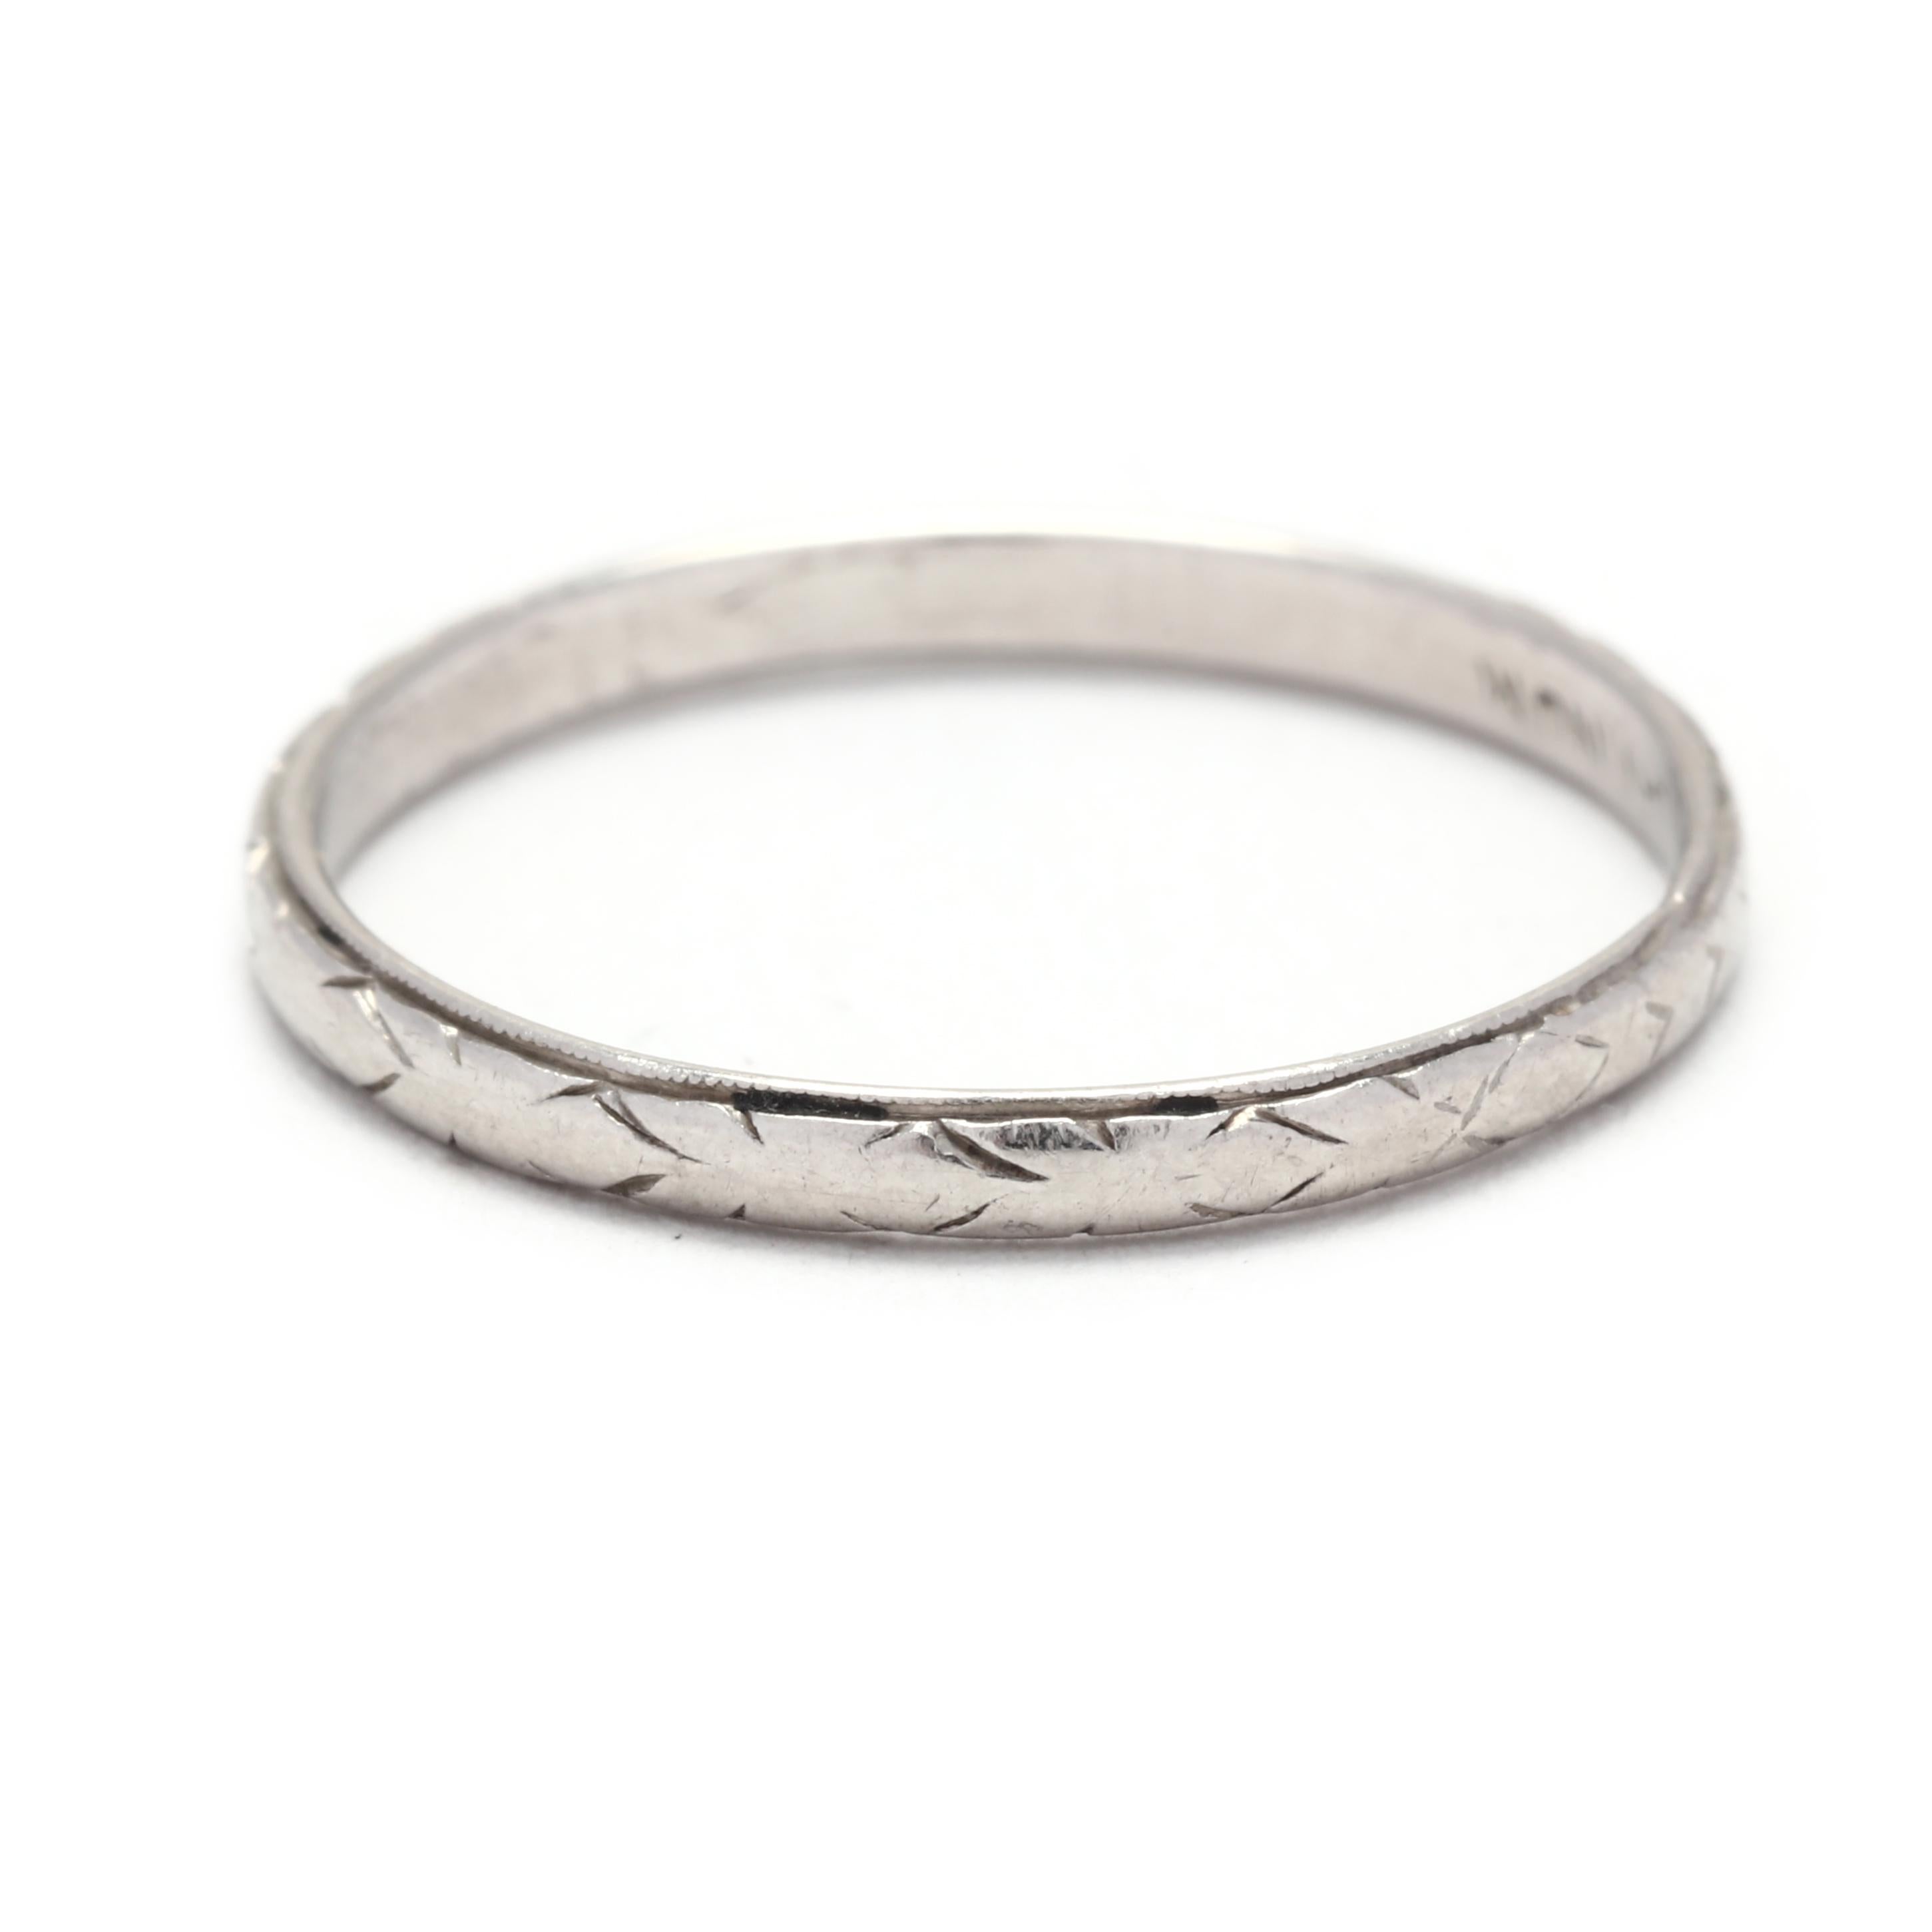 This Art Deco Platinum Engraved Wedding Band is a stunning and unique choice for a wedding or anniversary ring. Made with platinum, this ring features delicate and intricate engravings, creating a beautiful texture and design. The band is thin and